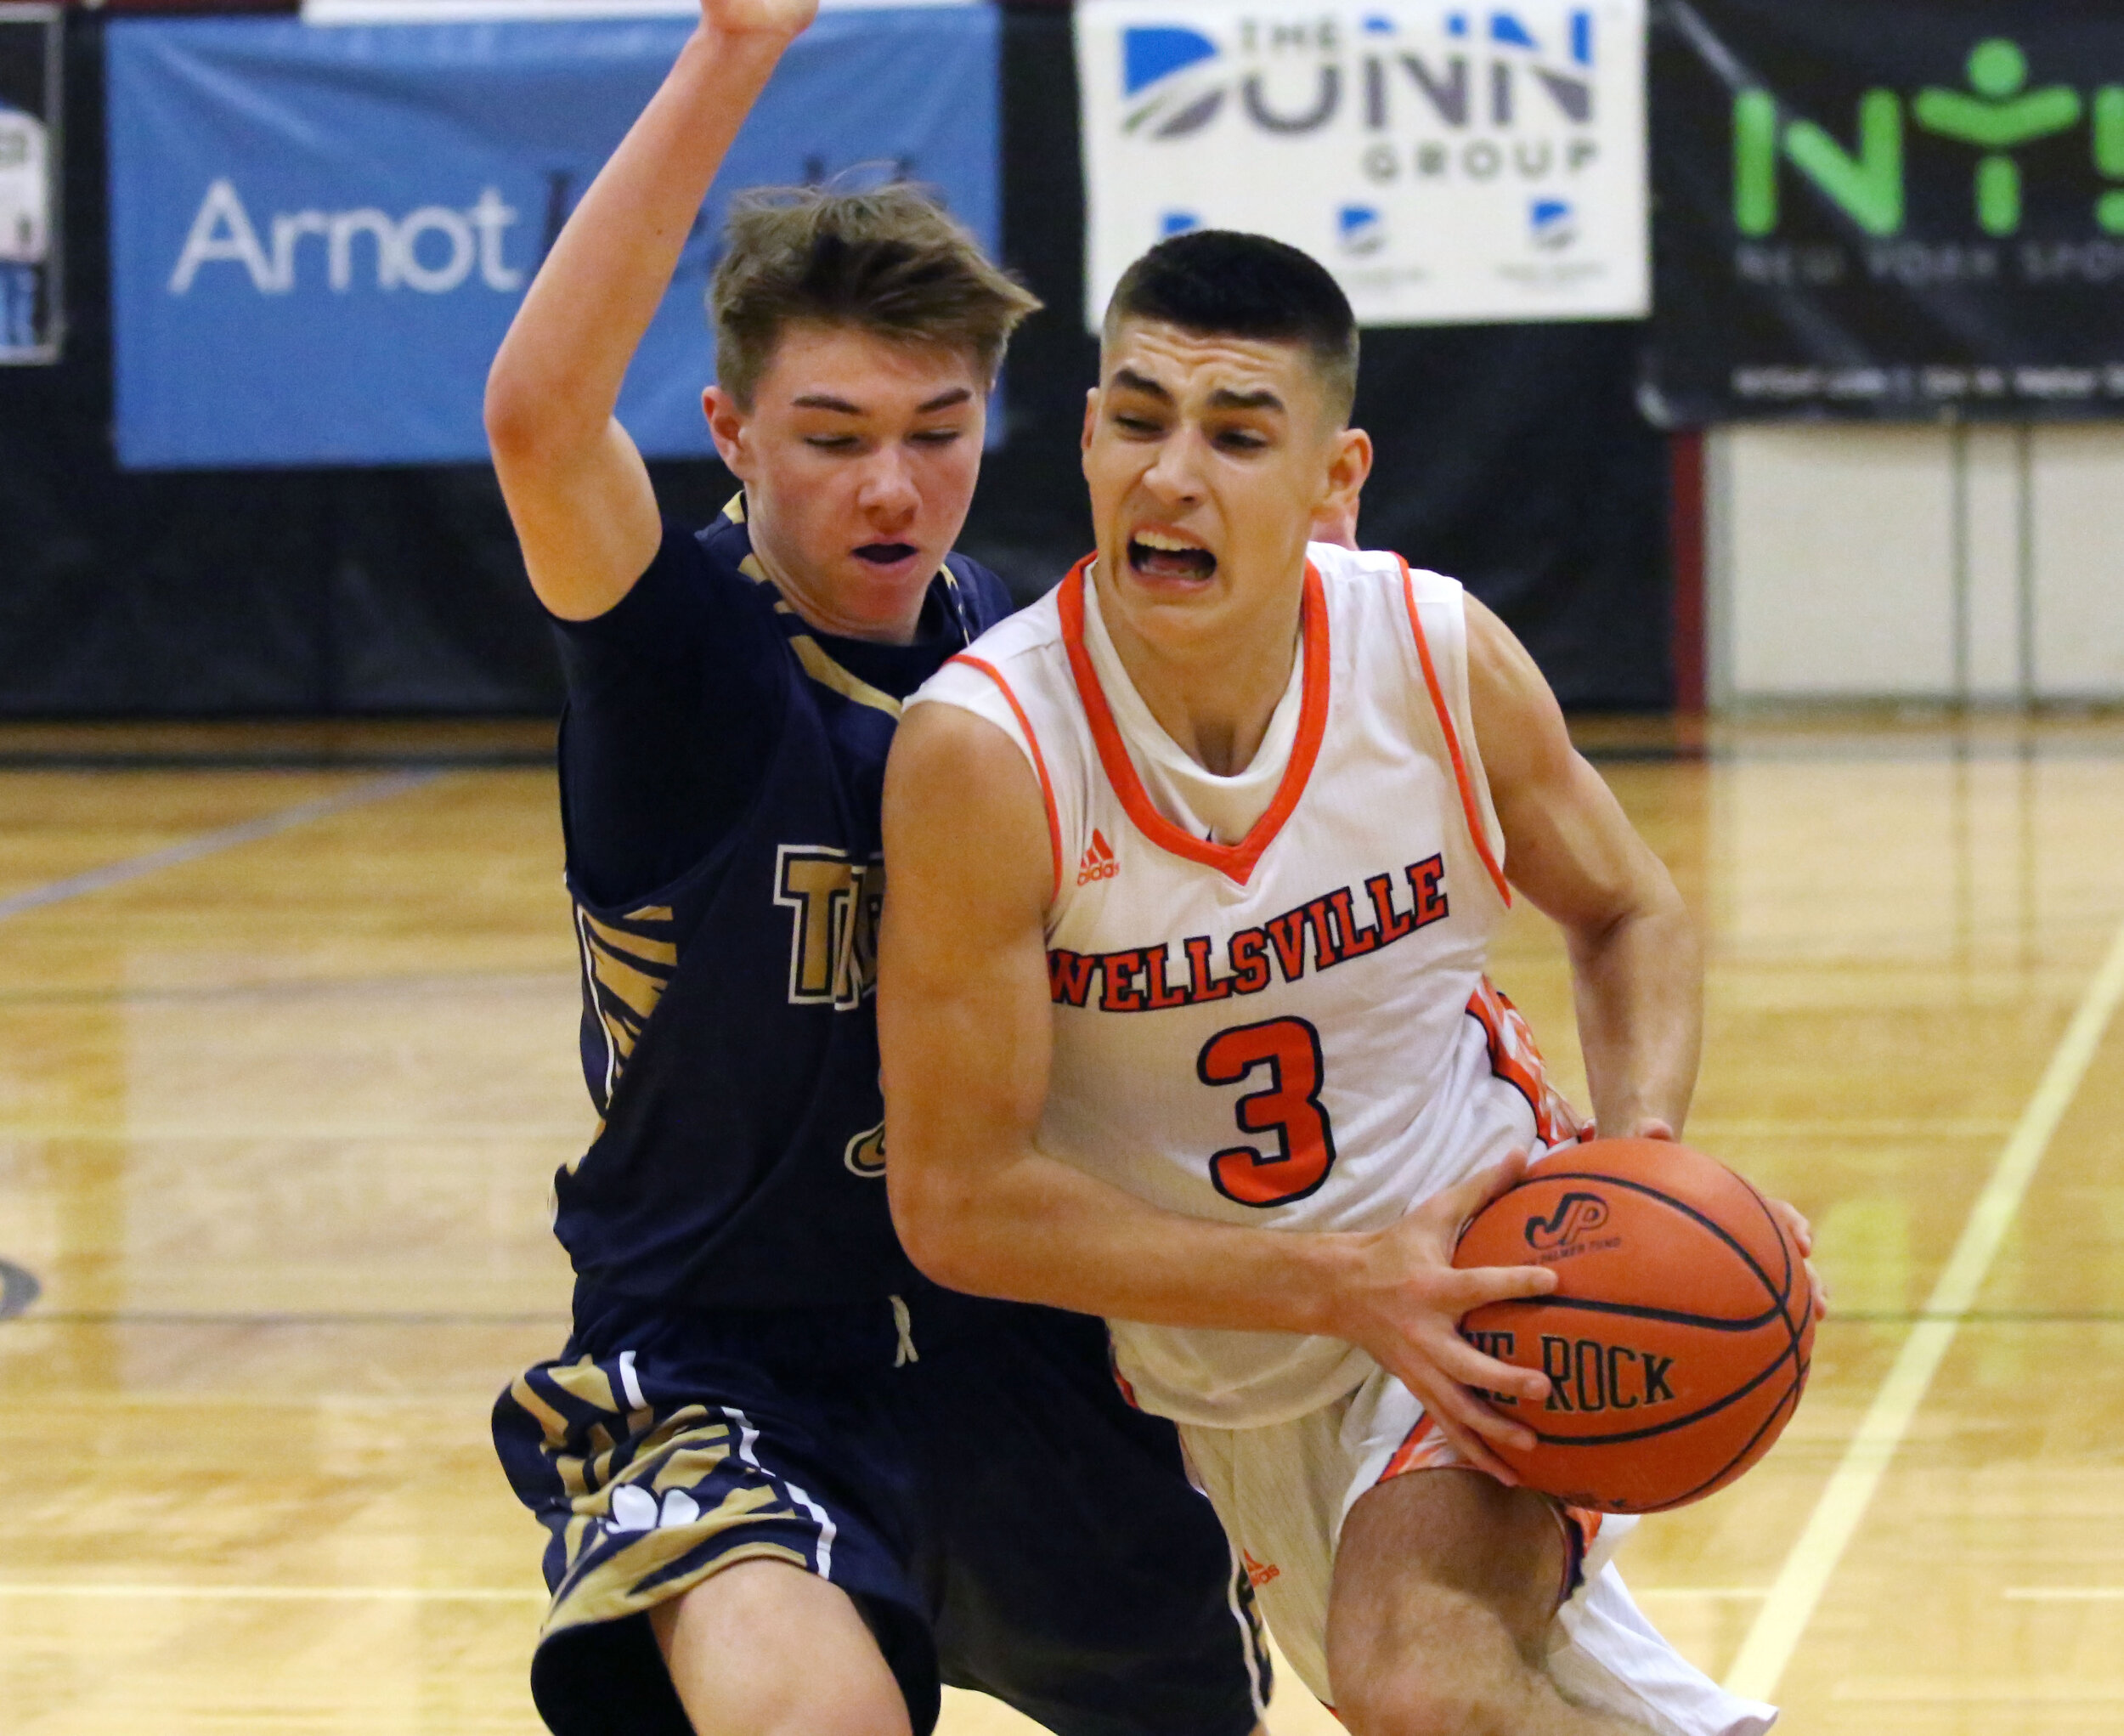  Wellsville senior Max Jusianiec (3) drives the lane against the North Penn-Mansfield defense during Monday afternoon’s championship game of the Josh Palmer Holiday Classic in Elmira. [Chris Brooks/WellsvilleSports.com] 